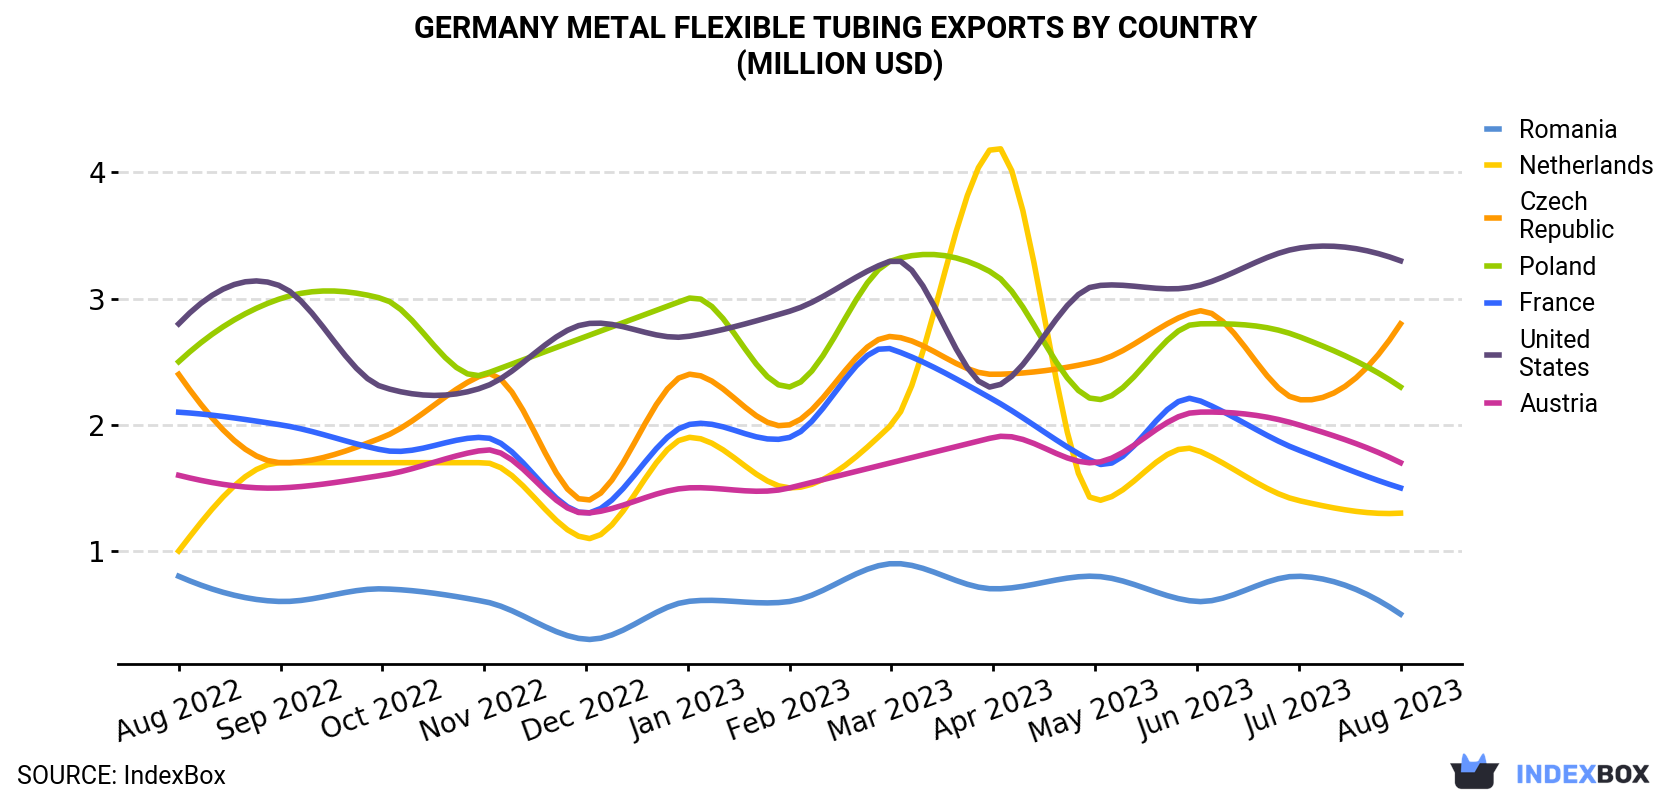 Germany Metal Flexible Tubing Exports By Country (Million USD)